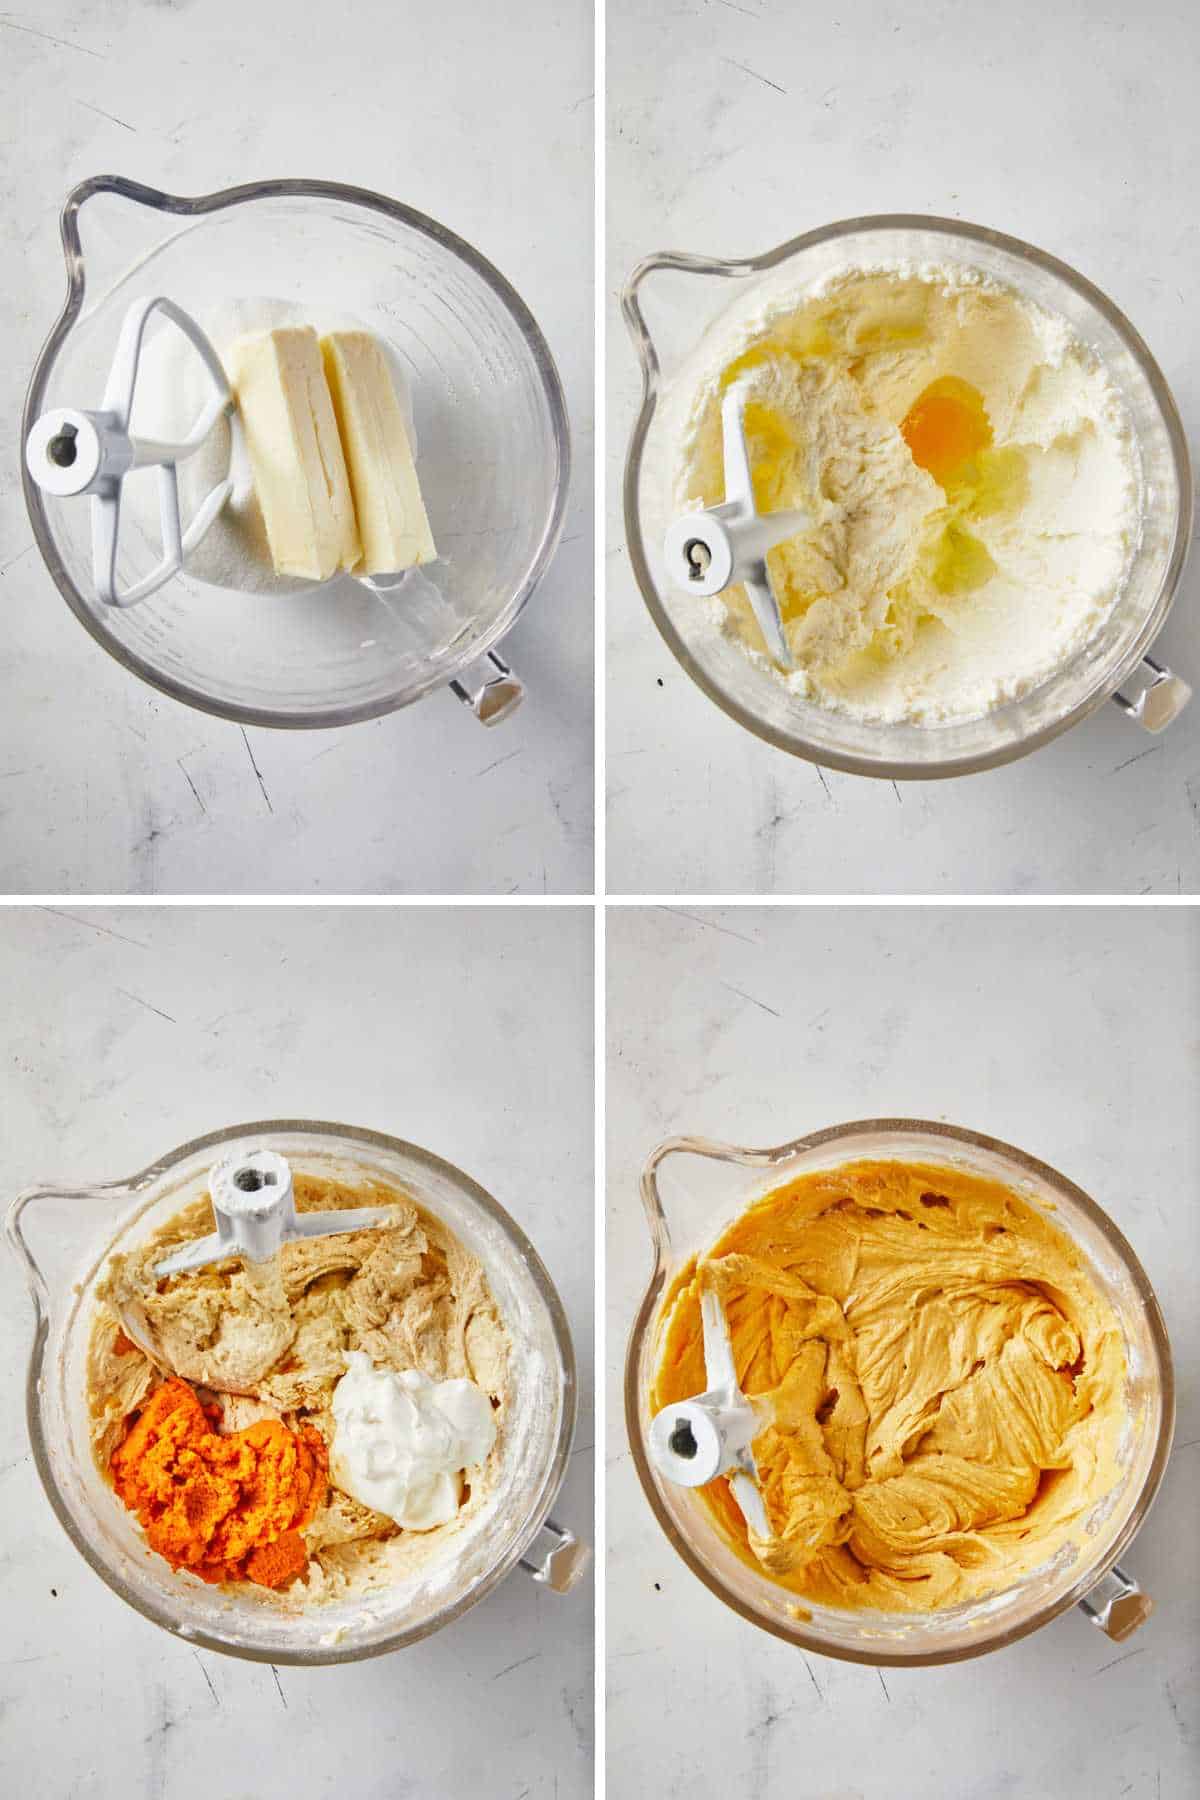 A collage showing the mixing ingredients to make a pumpkin pound cake.